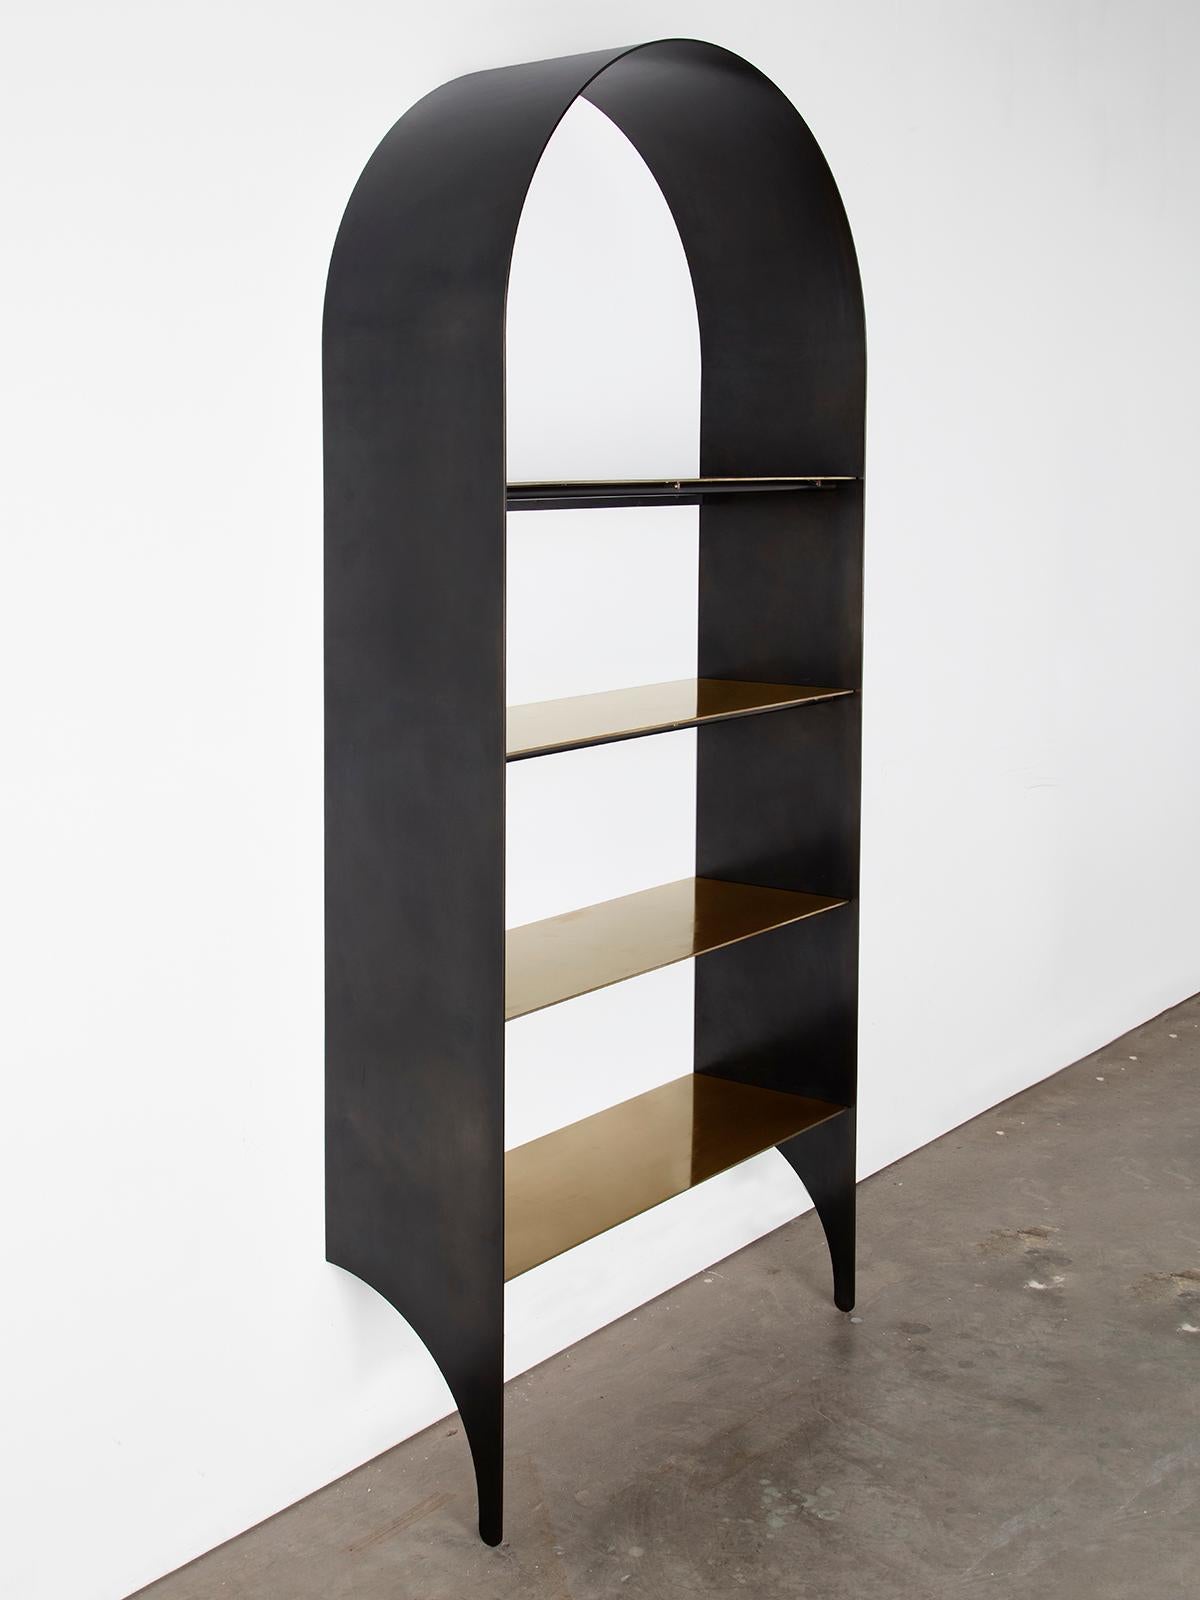 Thin shelf single, blackened steel and stainless steel inset shelves is the newest addition to the Thin series, a collection exploring the potential of rigid yet pliant steel plates. The blackened steel arch of the thin shelf delicately extends